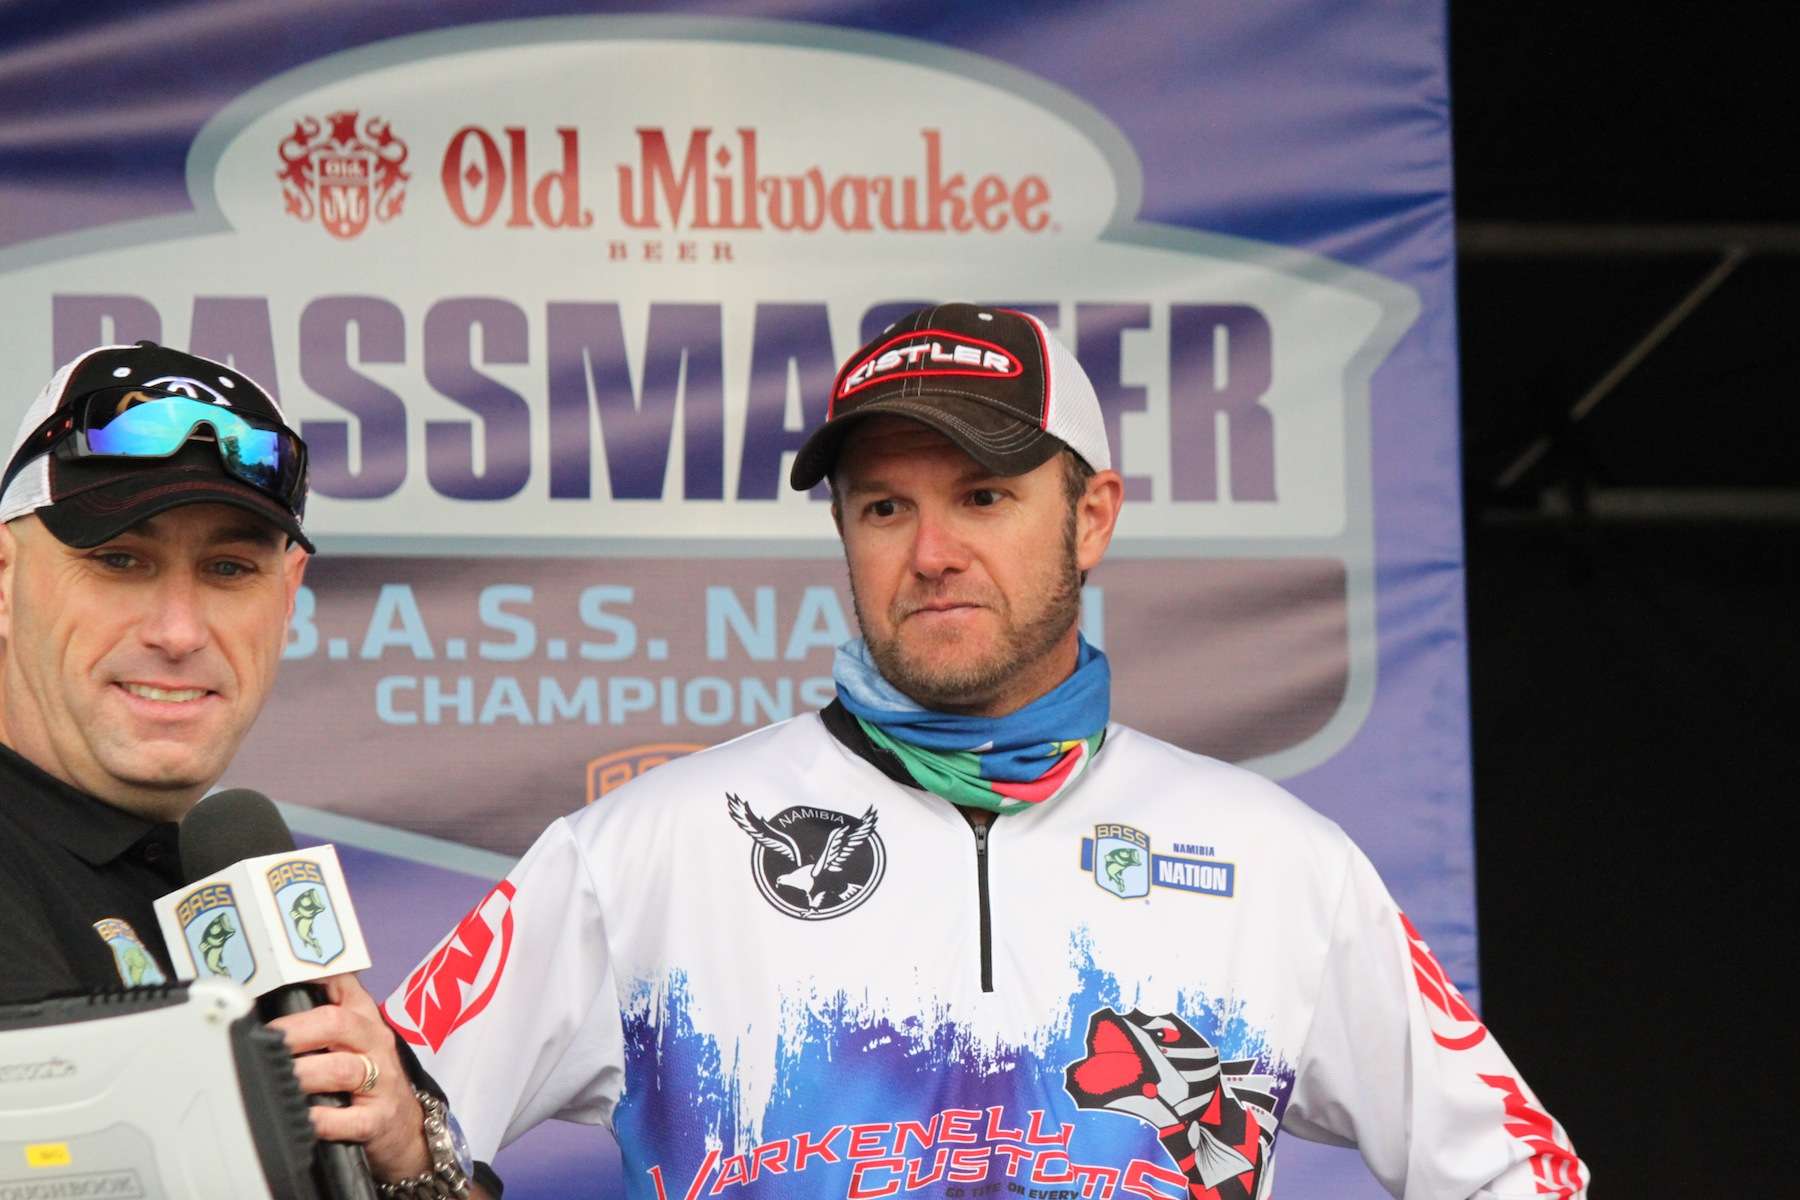 Max Pieper is the first angler ever to represent Namibia in the B.A.S.S. Nation Championship and finishes the event in 47th with 10-9. 